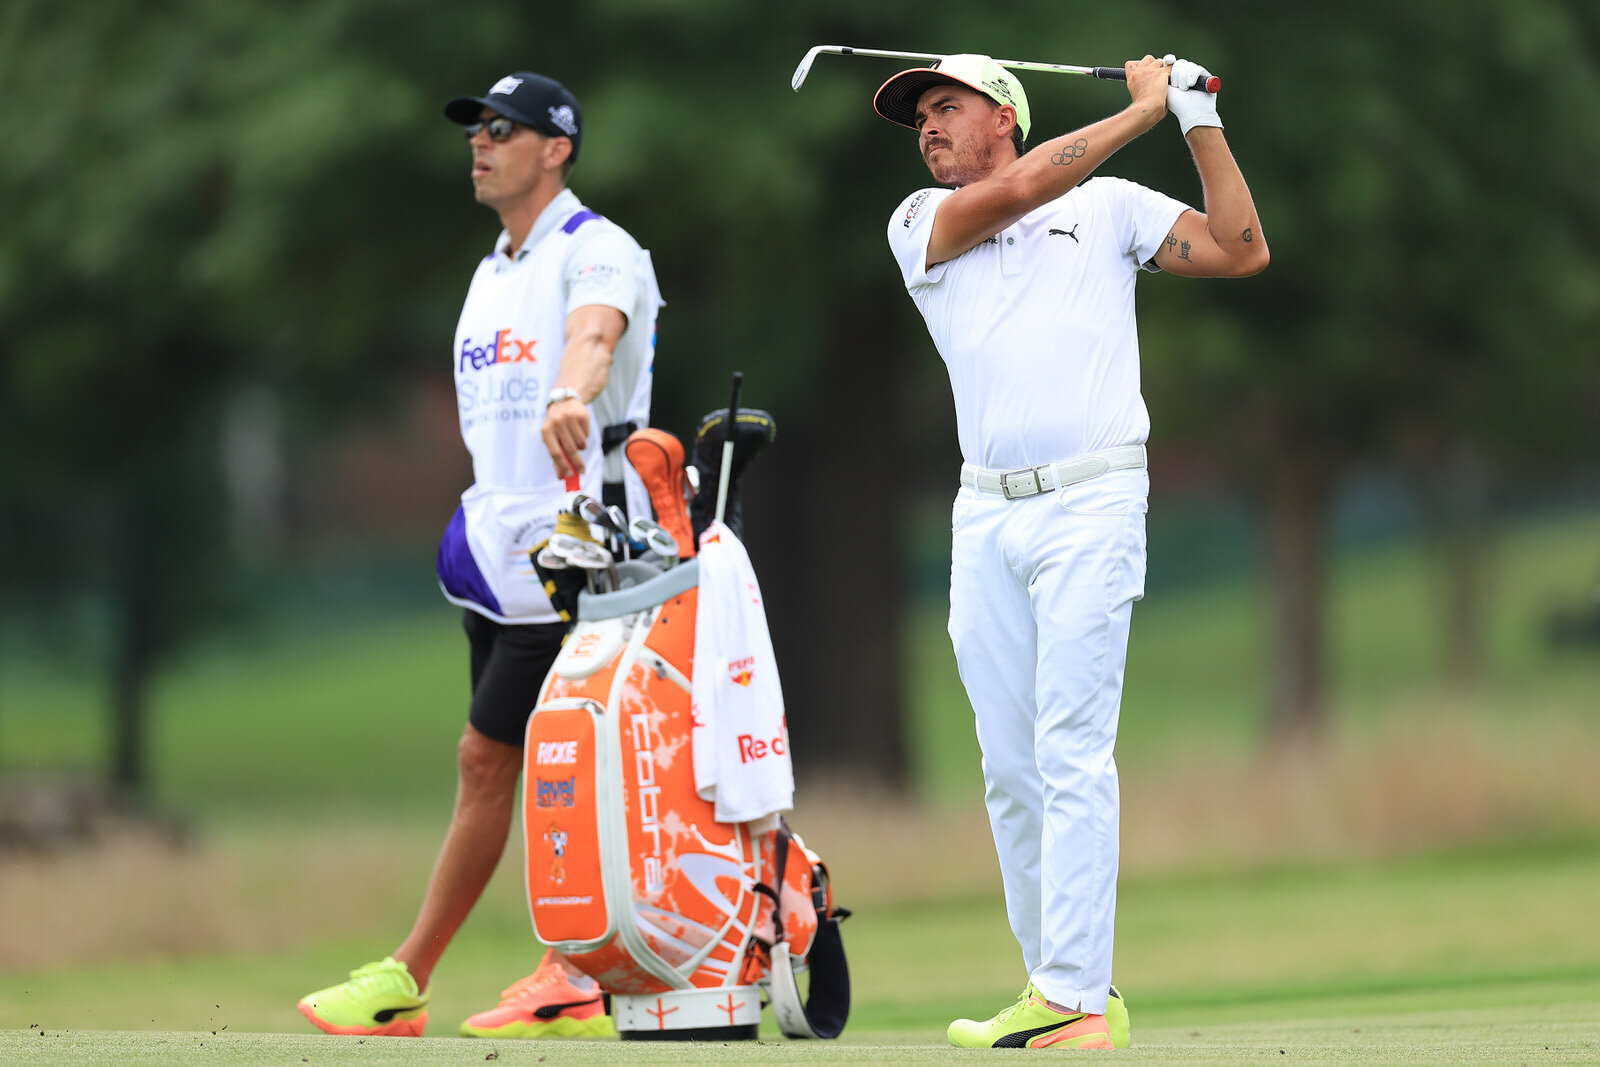  MEMPHIS, TENNESSEE - JULY 30: Rickie Fowler of the United States plays a shot on the 13th hole during the first round of the World Golf Championship-FedEx St Jude Invitational at TPC Southwind on July 30, 2020 in Memphis, Tennessee. (Photo by Andy L